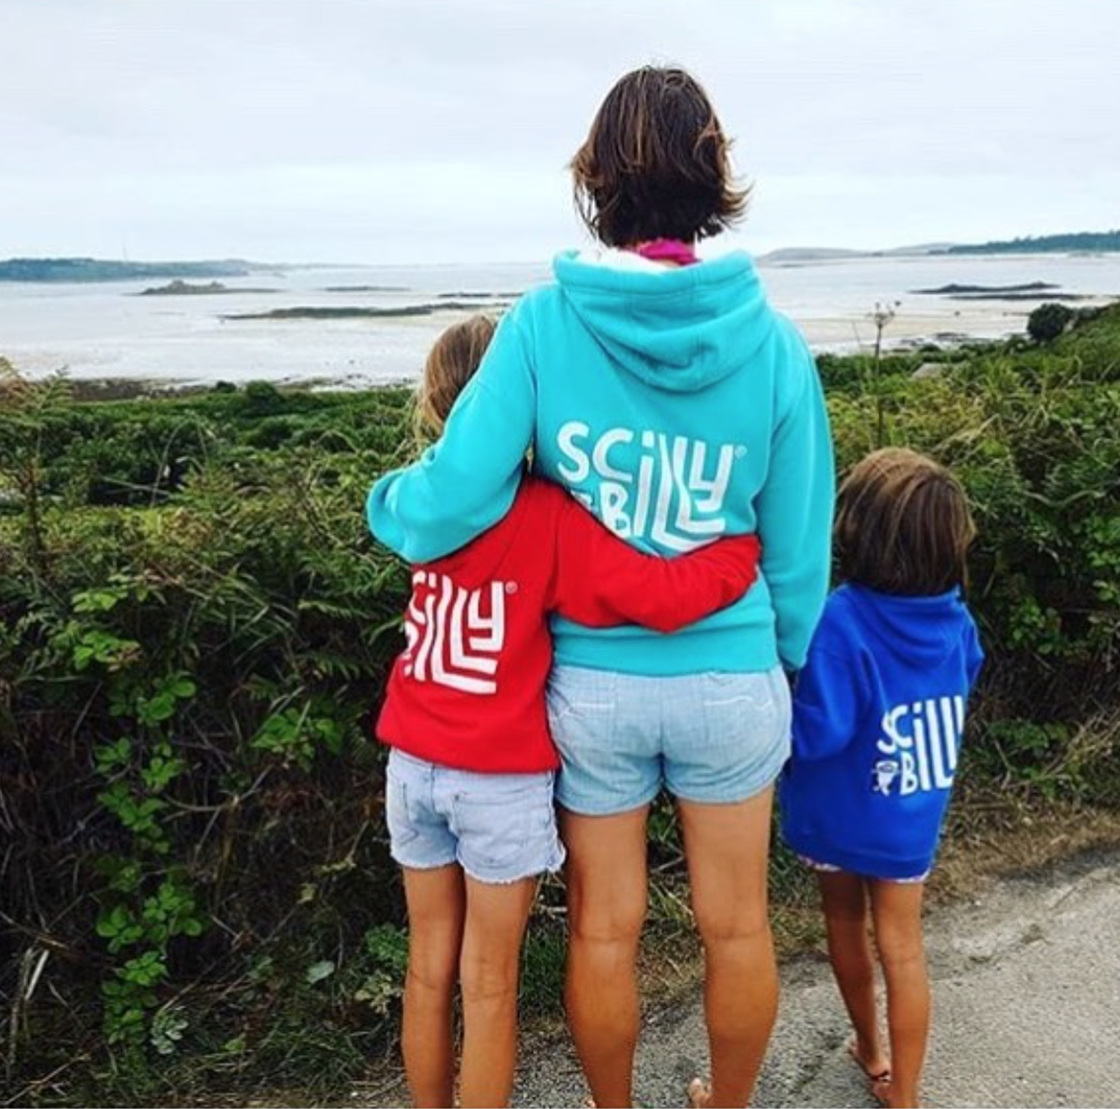 Scilly Billy Family